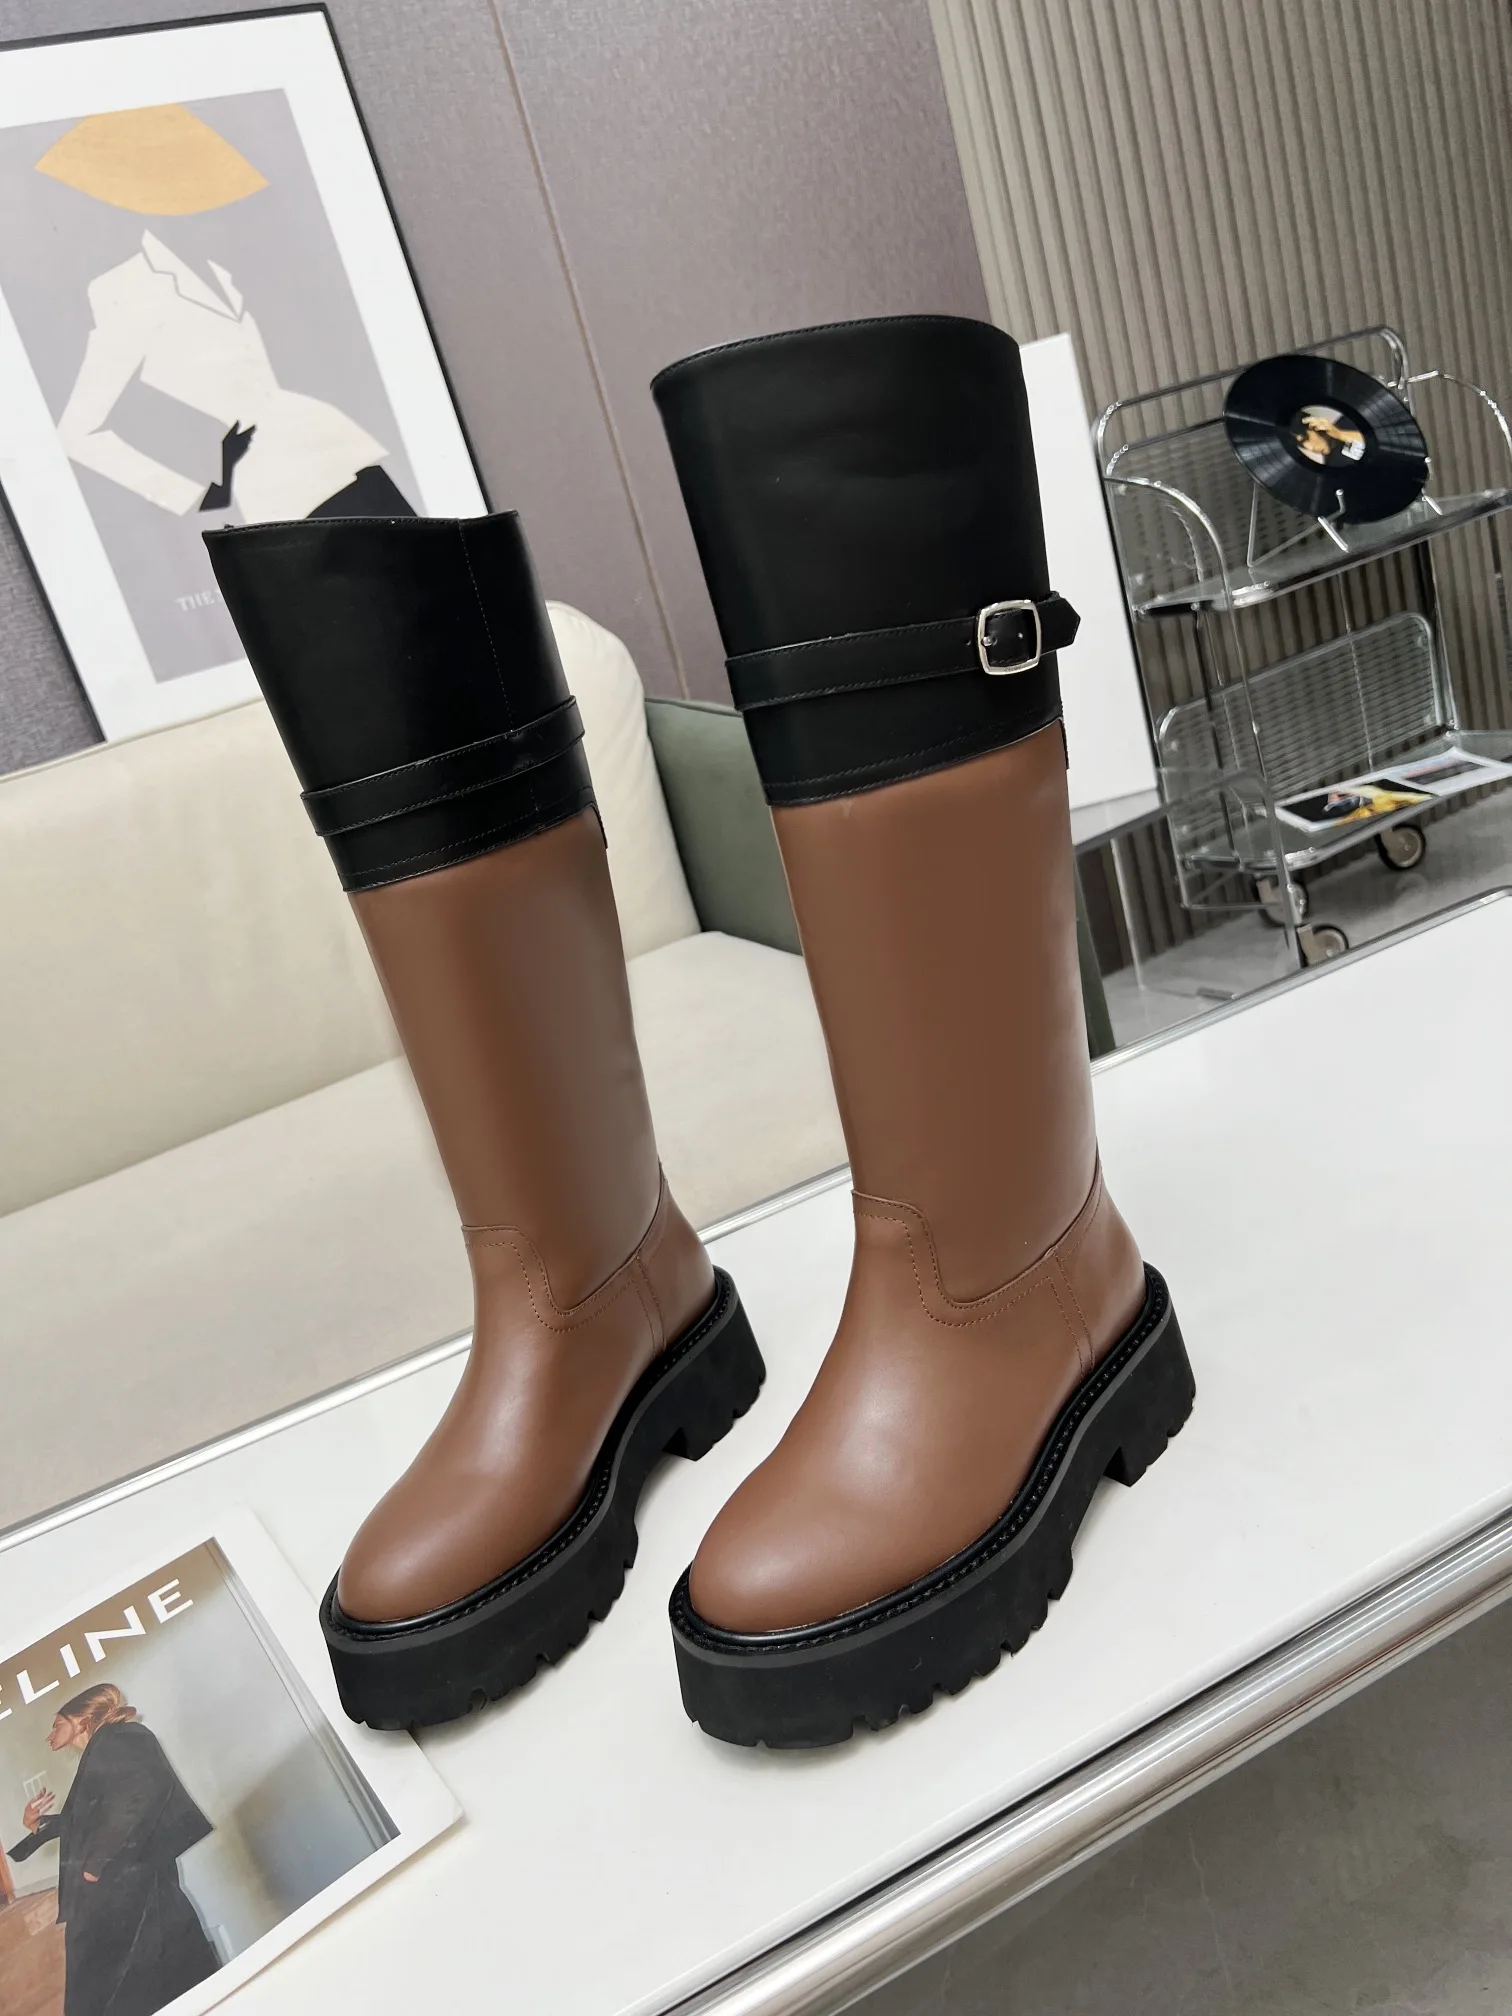 

2023 autumn and winter new women's long knight boots, leather material, foam sole, soft, comfortable and fashionable